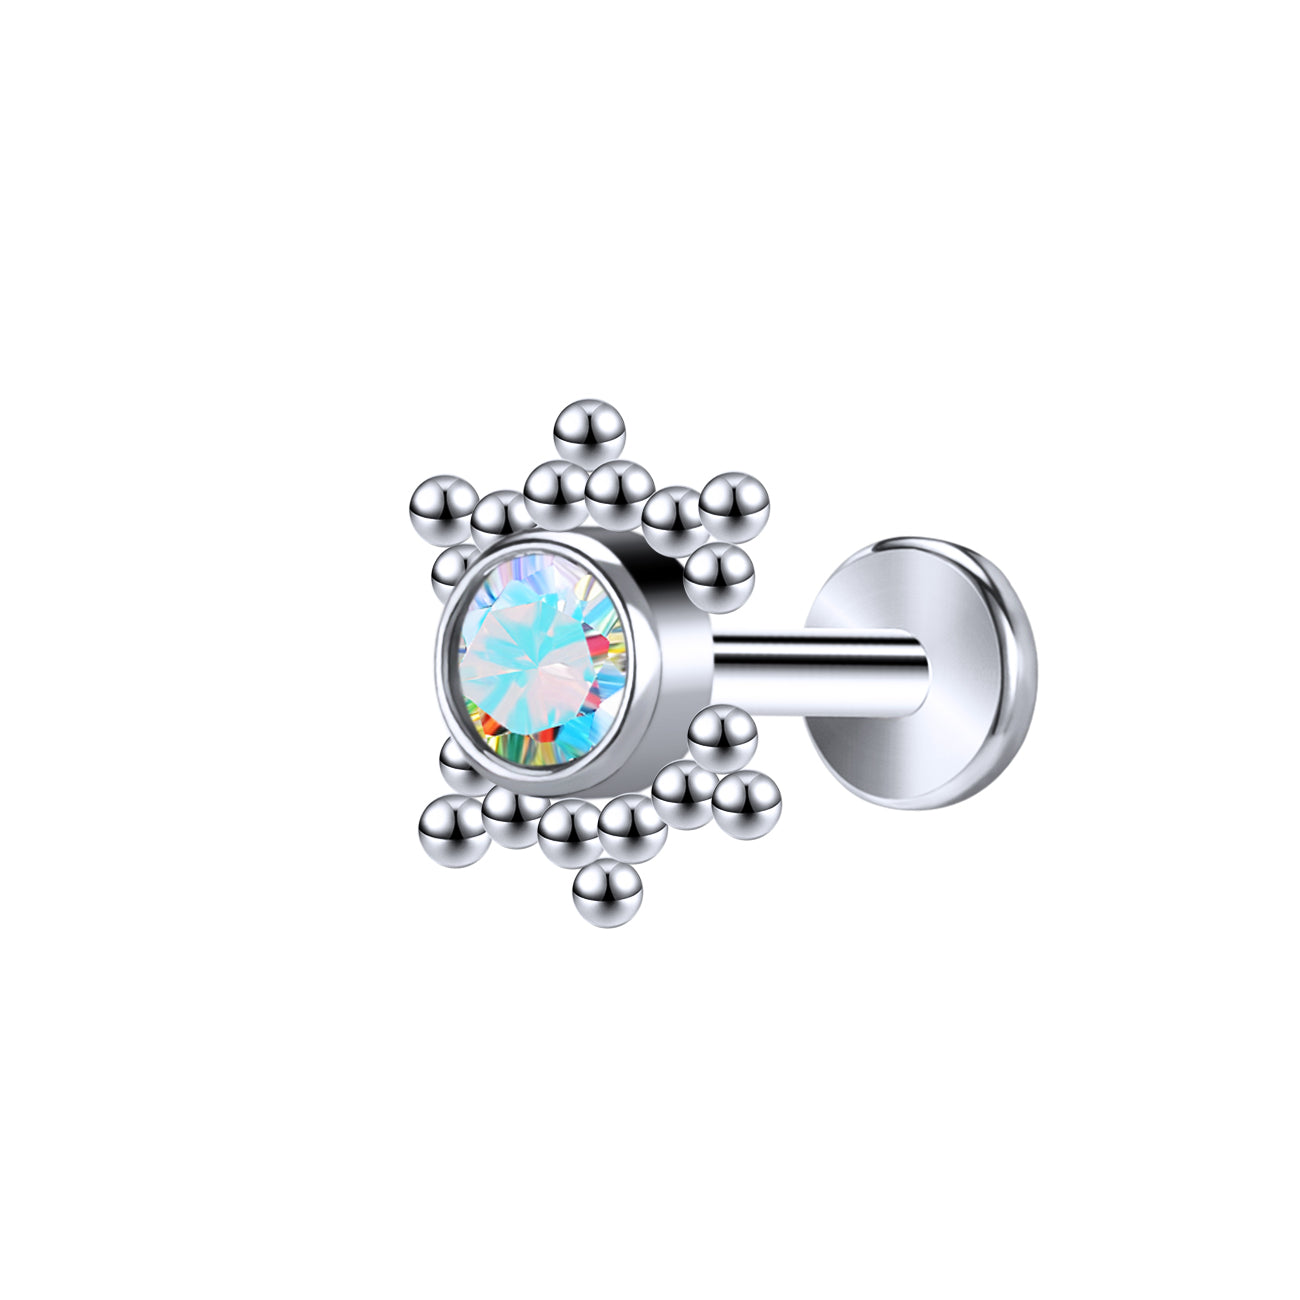 16g-crystal-labret-rings-triangle-ball-tragus-helix-conch-piercing